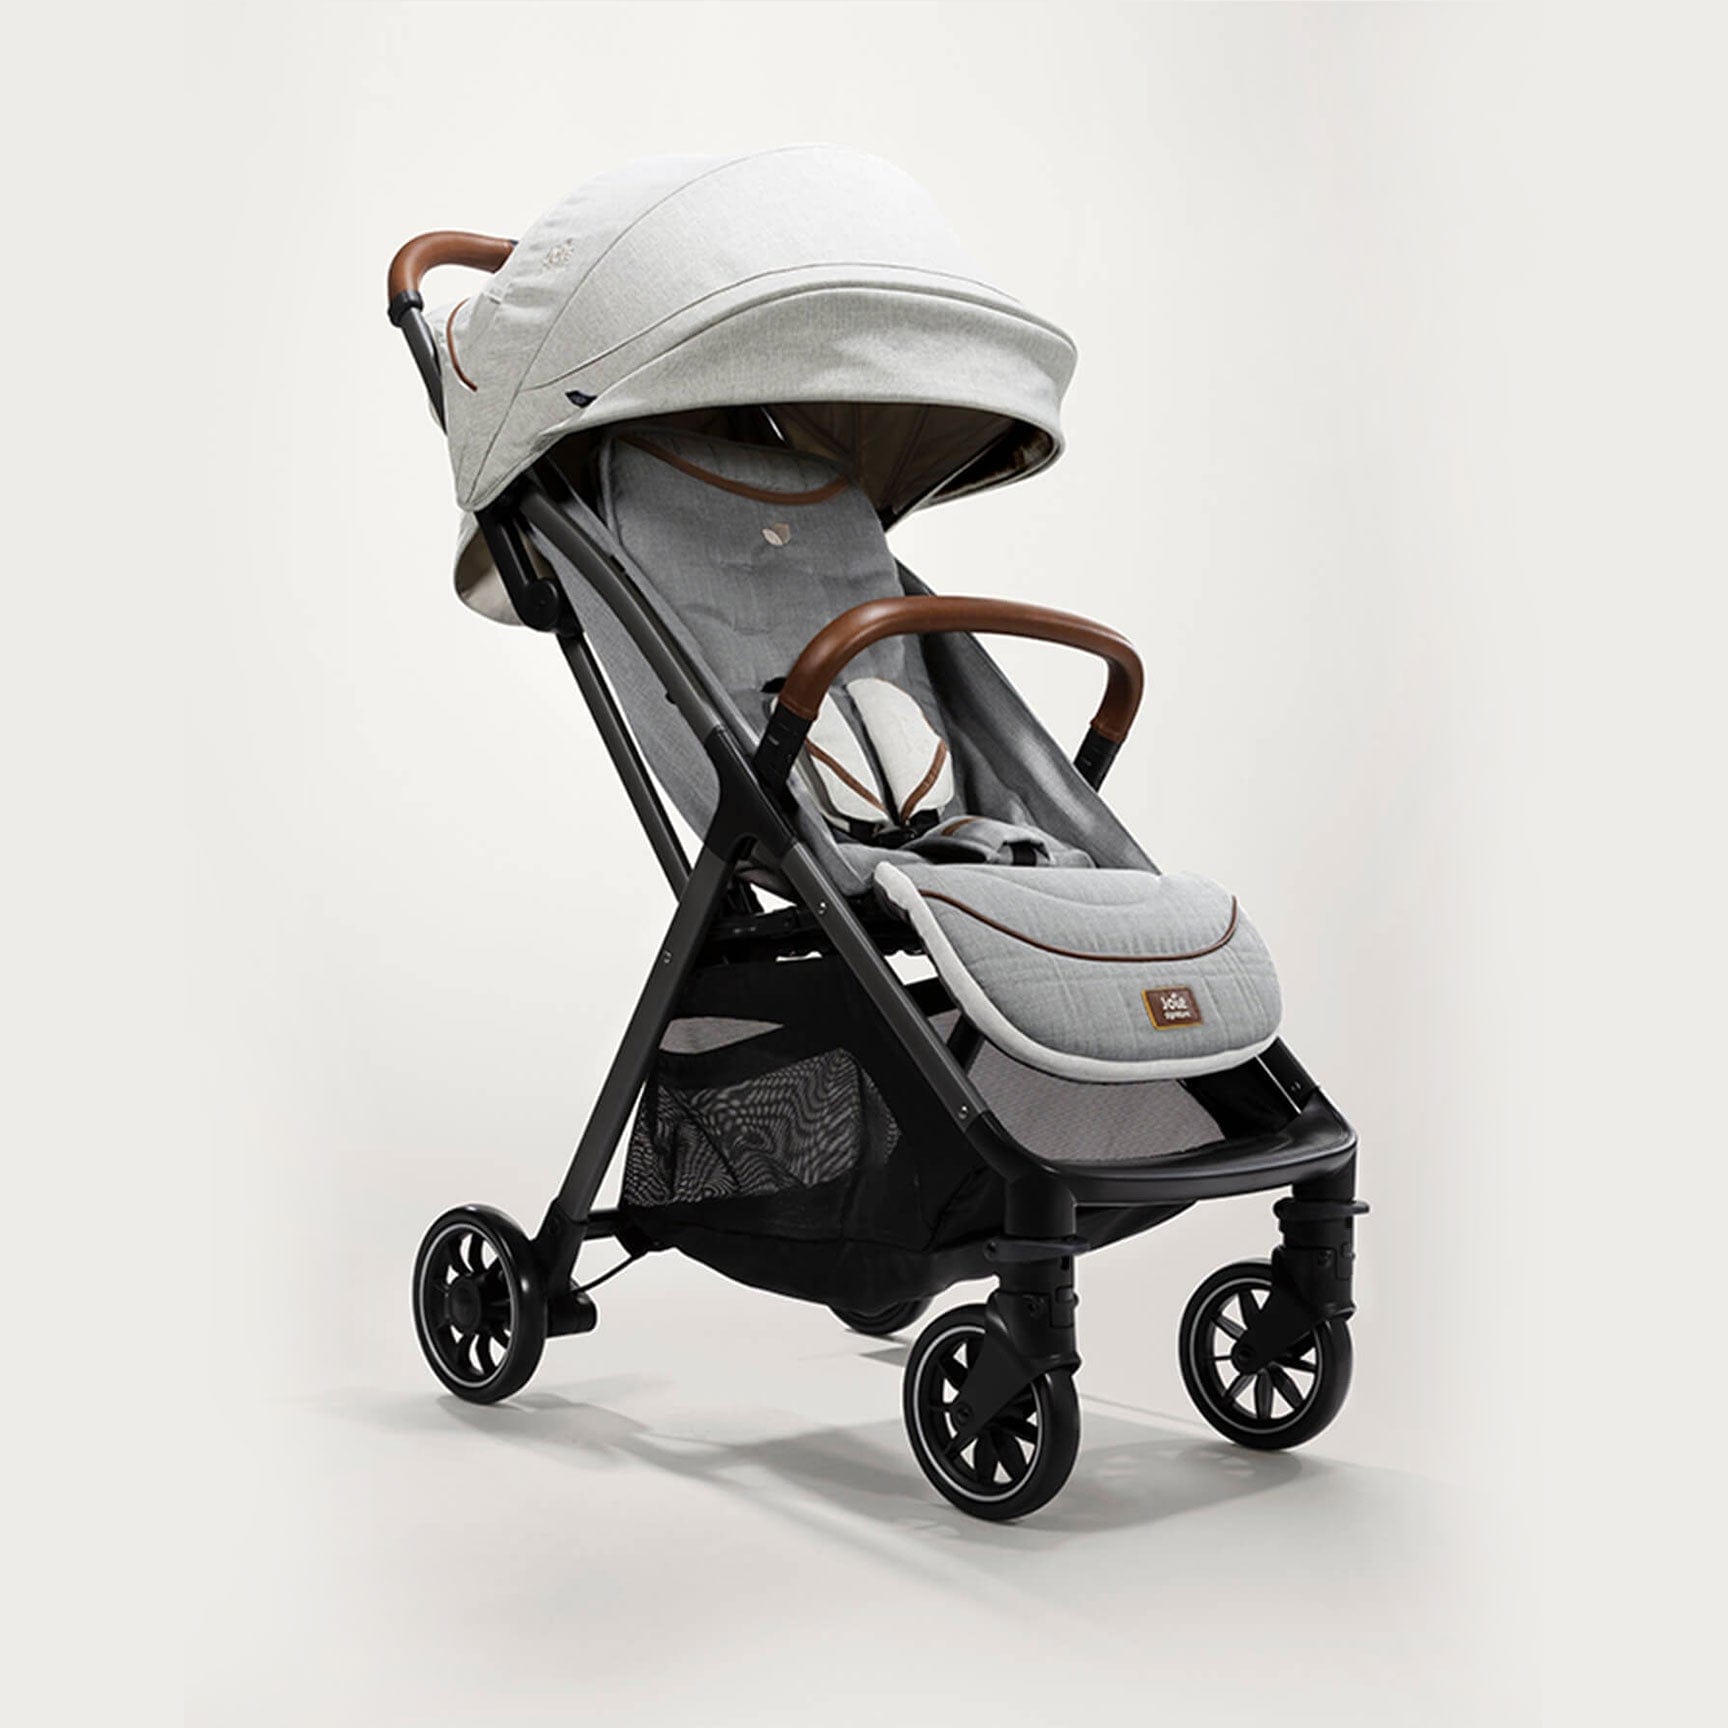 Joie Pushchairs & Buggies Joie Parcel Signature Stroller - Oyster S2112AAOYS000